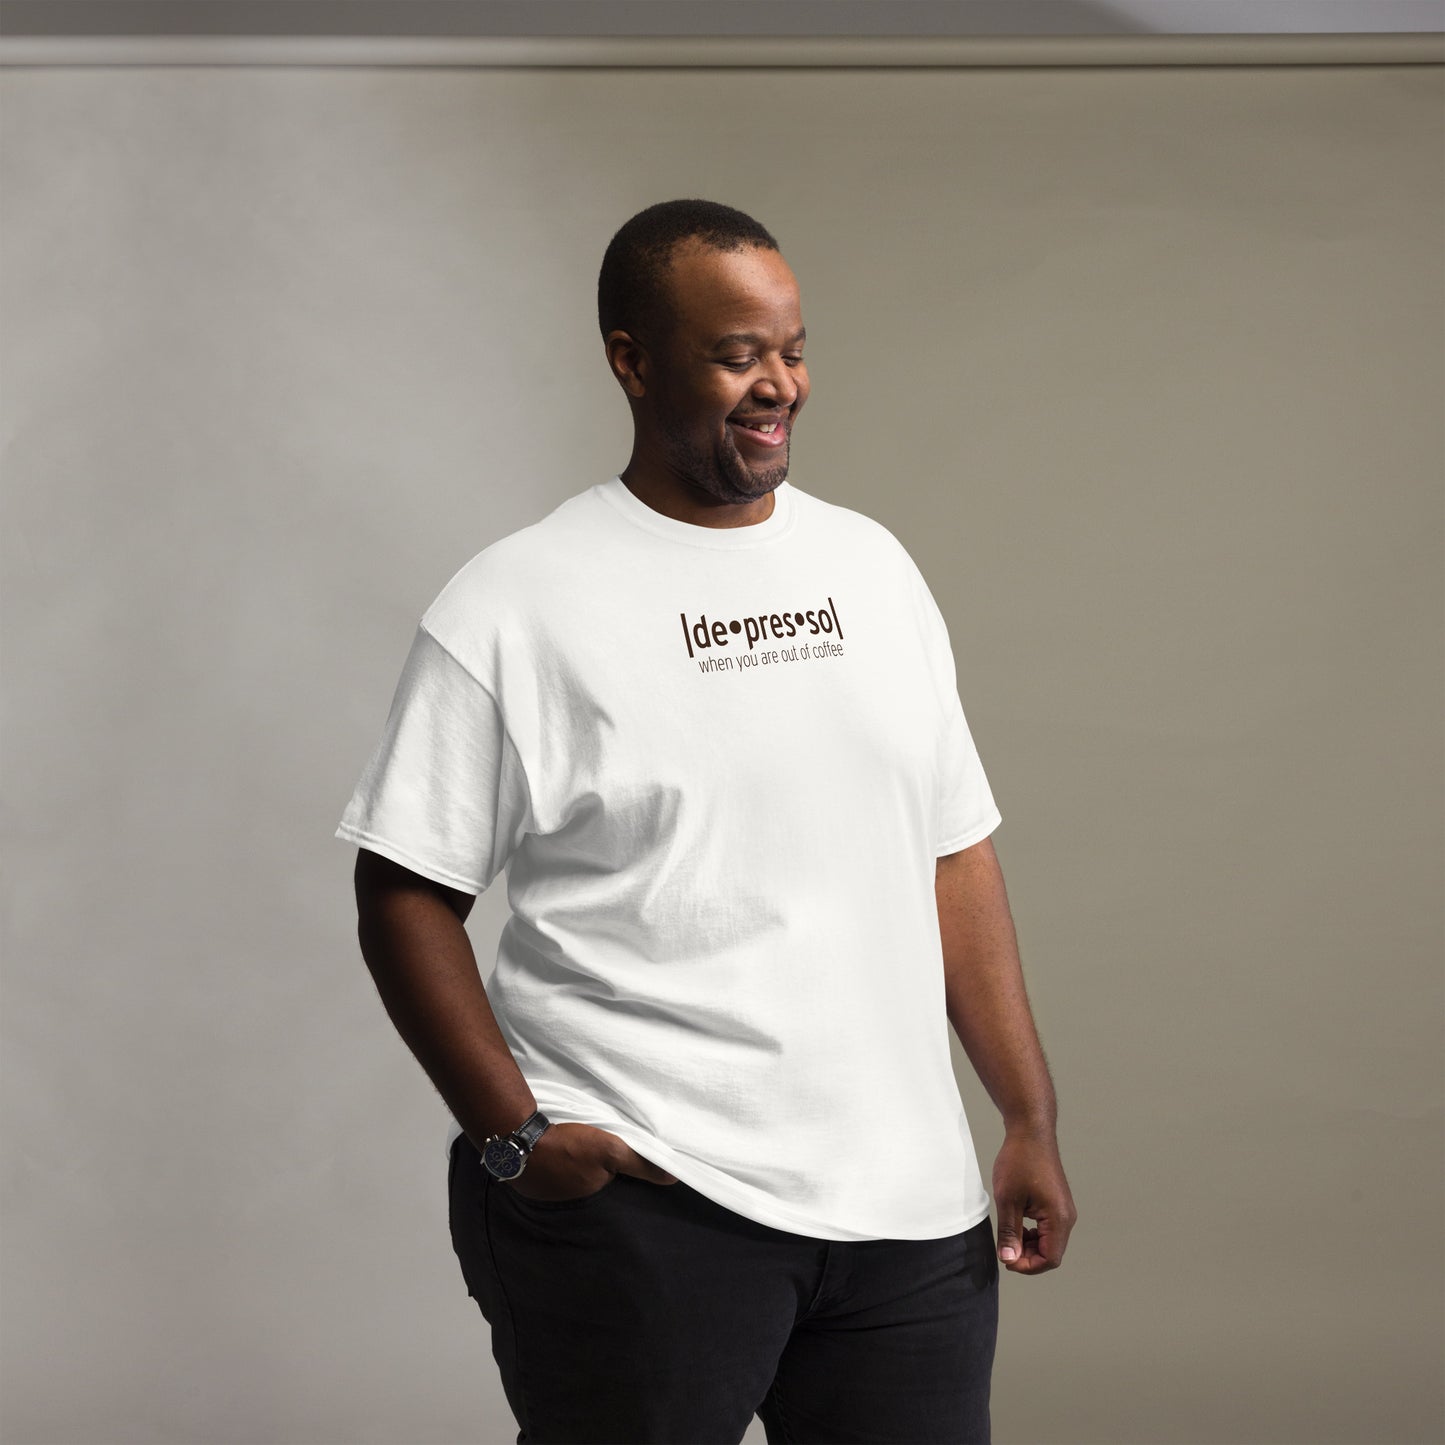 Man chuckling to himself, clad in a casual white t-shirt with the quirky statement 'depresso' and 'when you are out of coffee' in a straightforward font, paired with black pants and a watch, in a room with a gradient grey background.